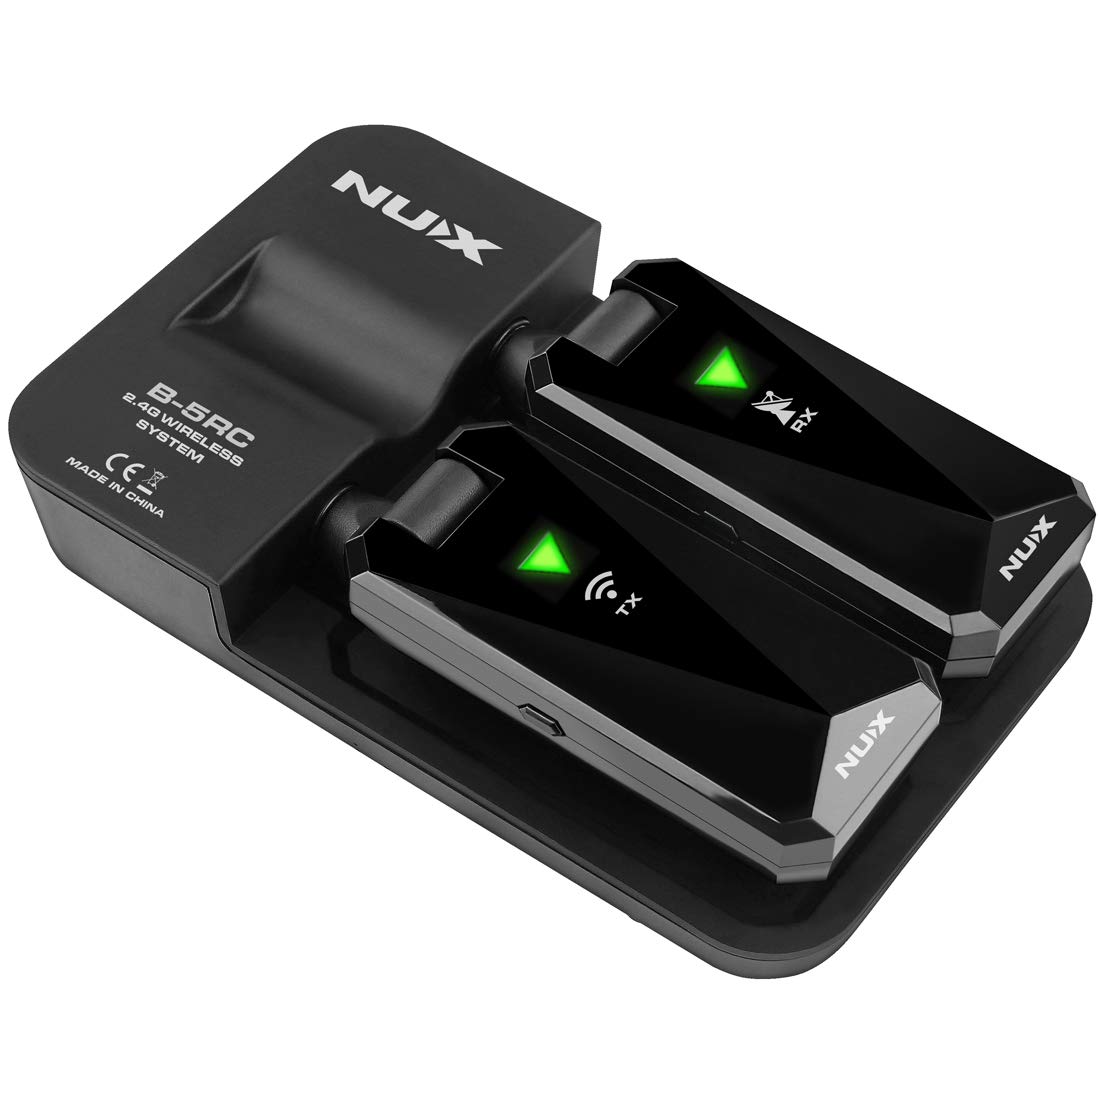 NUX - B-5RC Wireless Guitar System for Most of Types of Guitar with Active or Passive Pickup, Charging Case Included,Auto Match,Mute Function,Guitar Wireless Transmitter and Receiver, 2.4GHz